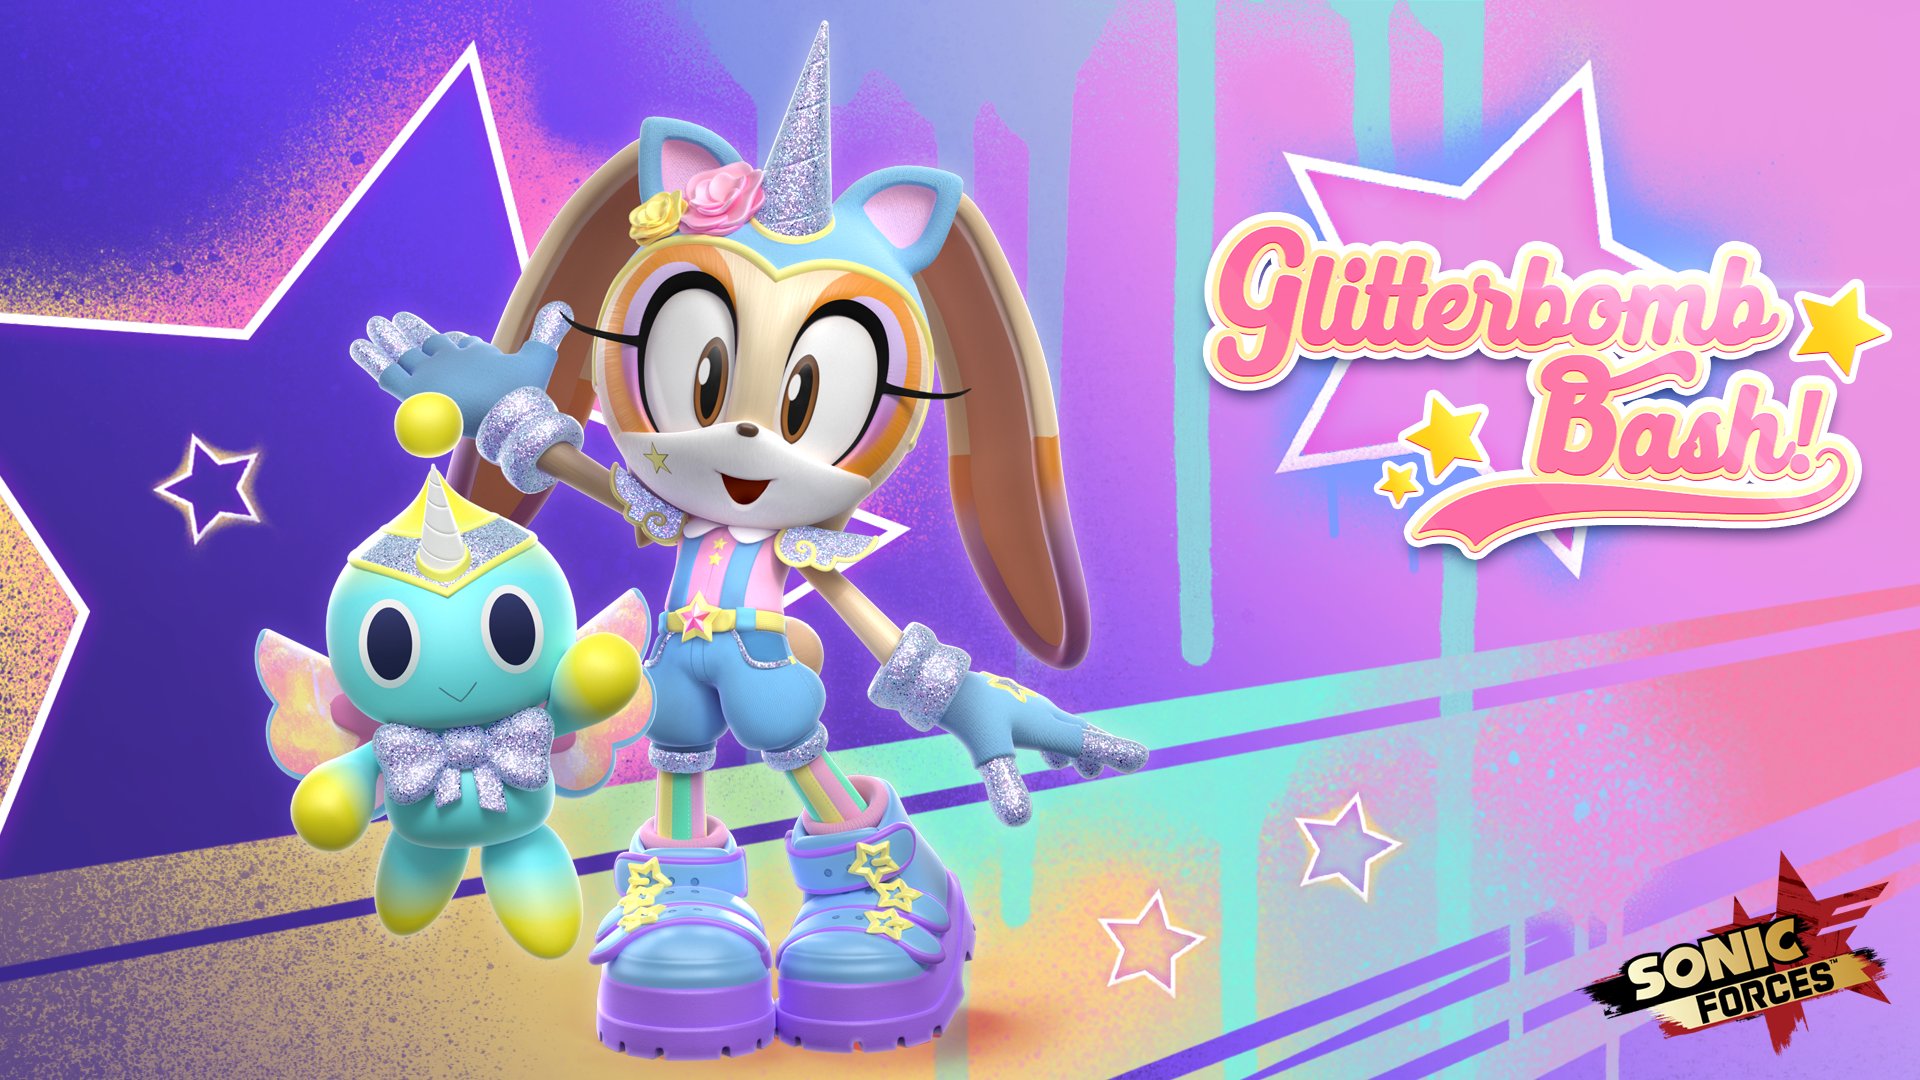 Sega Hardlight Unicorn Cream Beams Into Battle Earn Special Cards For Sonicforces Mobile S Cutest And Most Colourful Runner In The Glitterbomb Bash Event T Co U7bs4v2jev Twitter